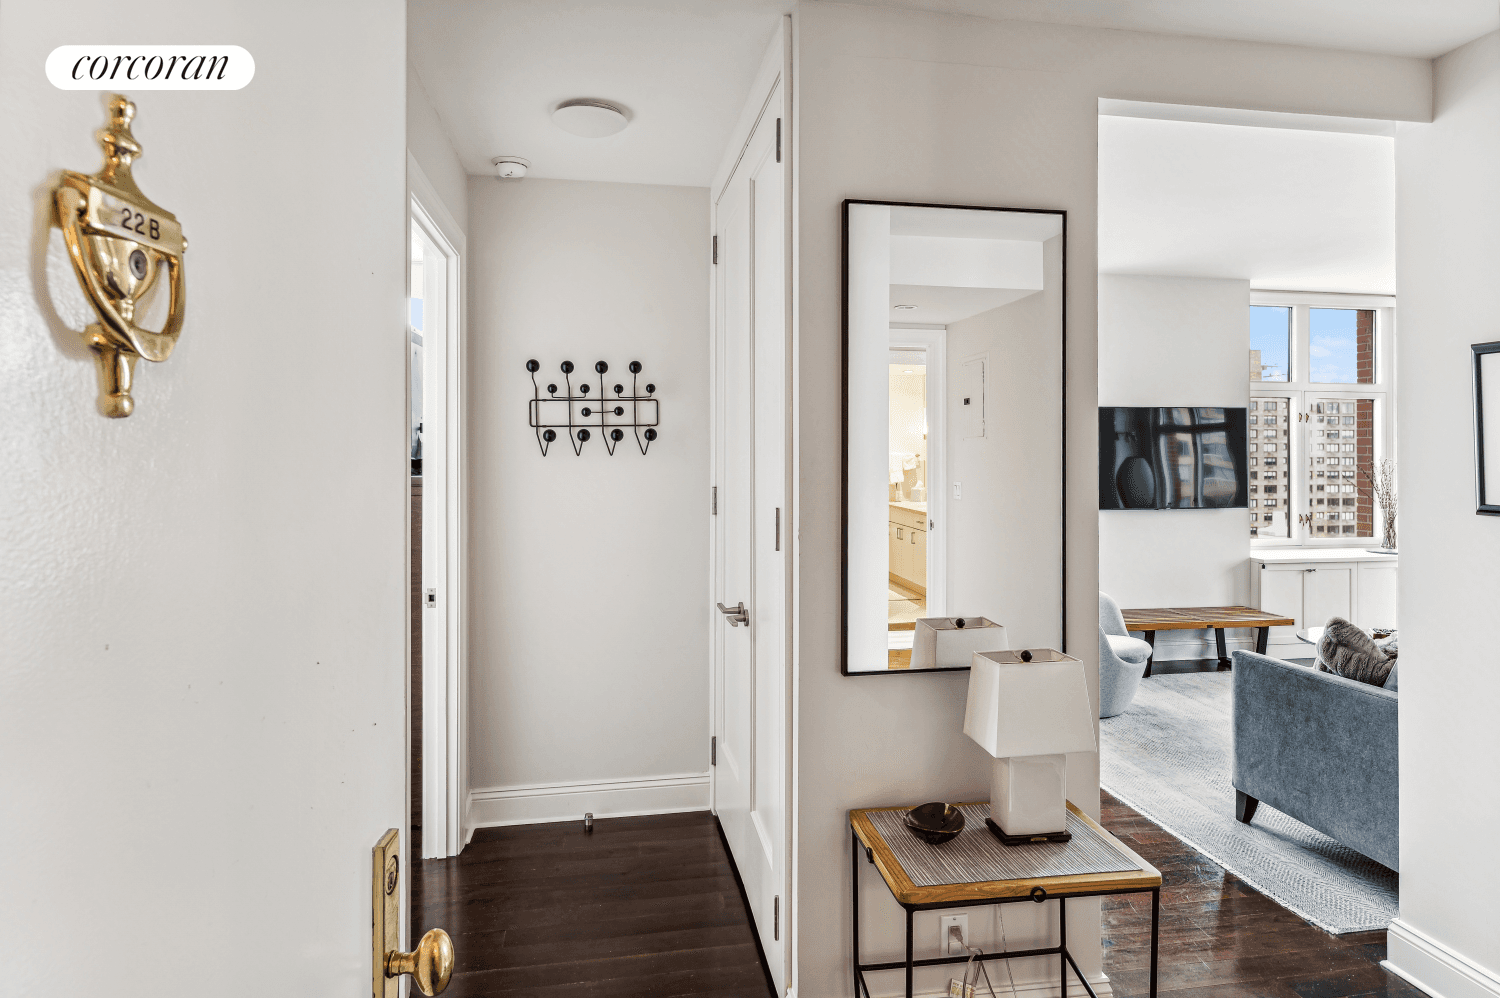 188 East 70th Street unit 22B, nestled among the charming townhouses and picturesque trees of the Upper East Side, offers a serene retreat in the heart of the city.